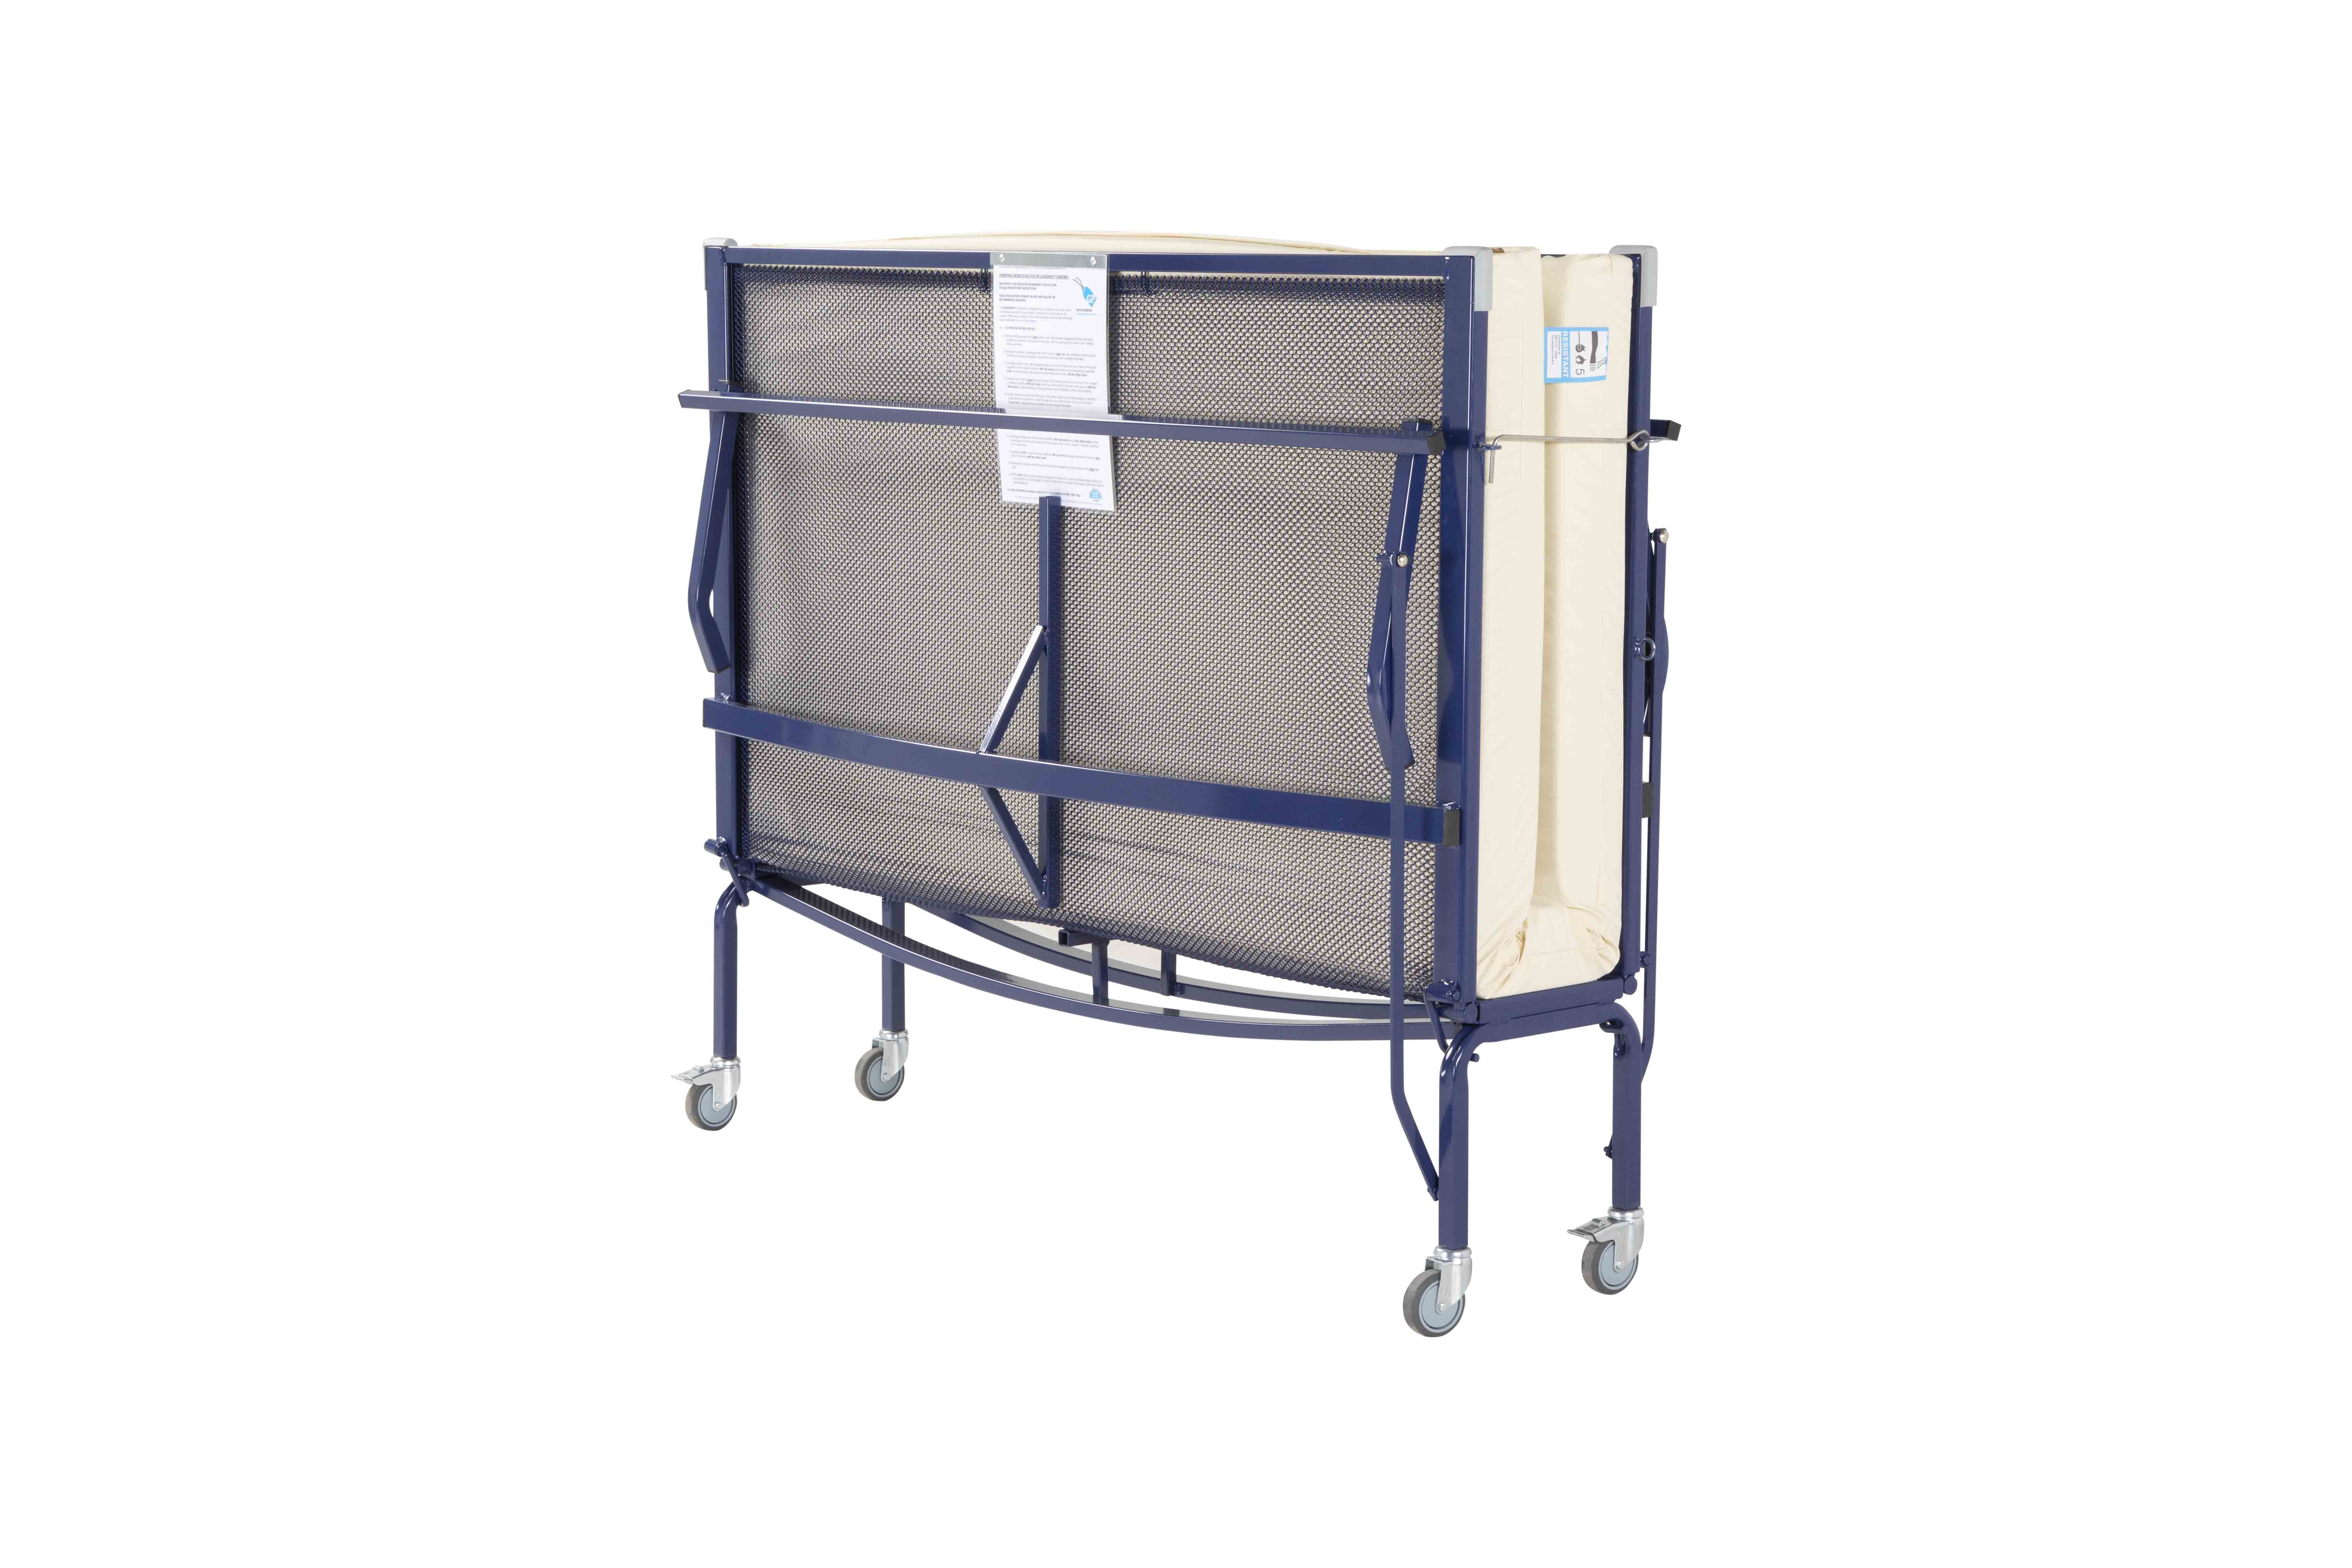 GP Care Systems adds two new double sizes to its ‘GLIDEAWAY’ guest bed family 